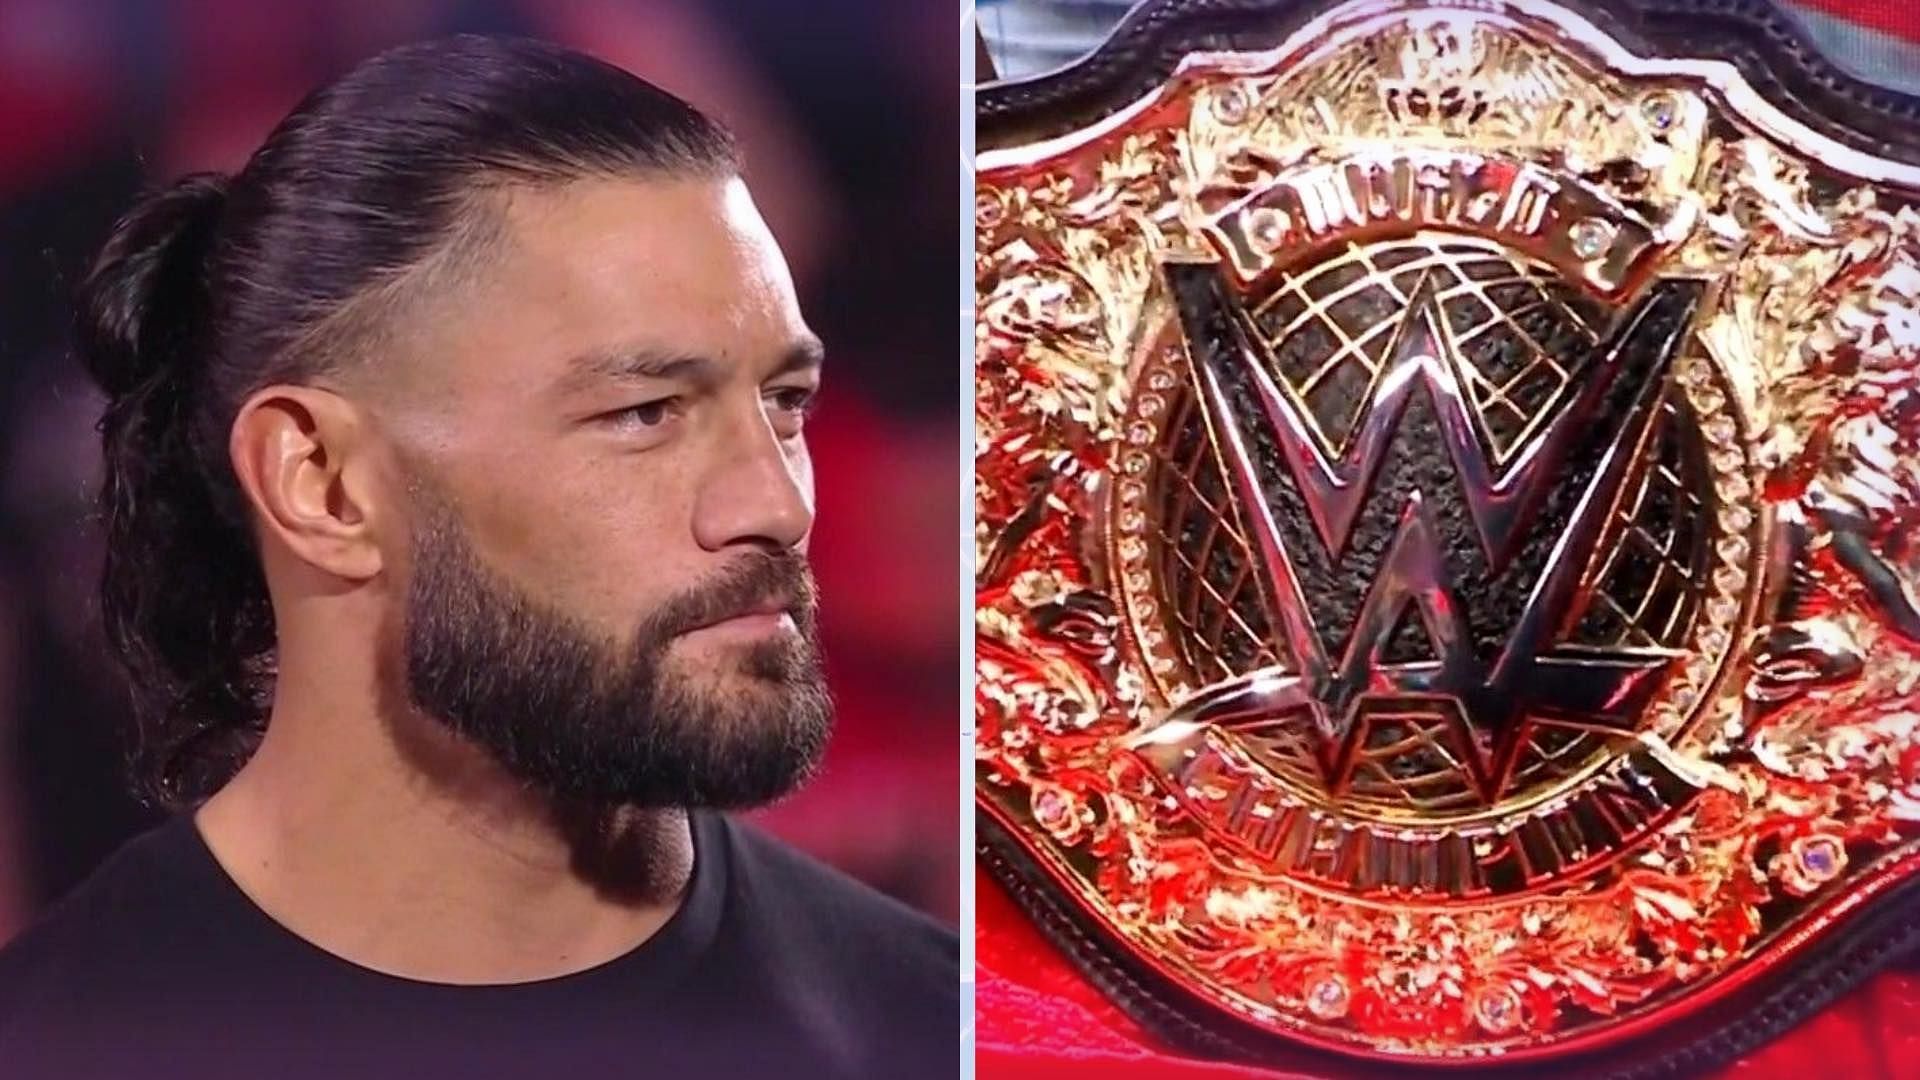 Roman Reigns wants to win the World Heavyweight Championship